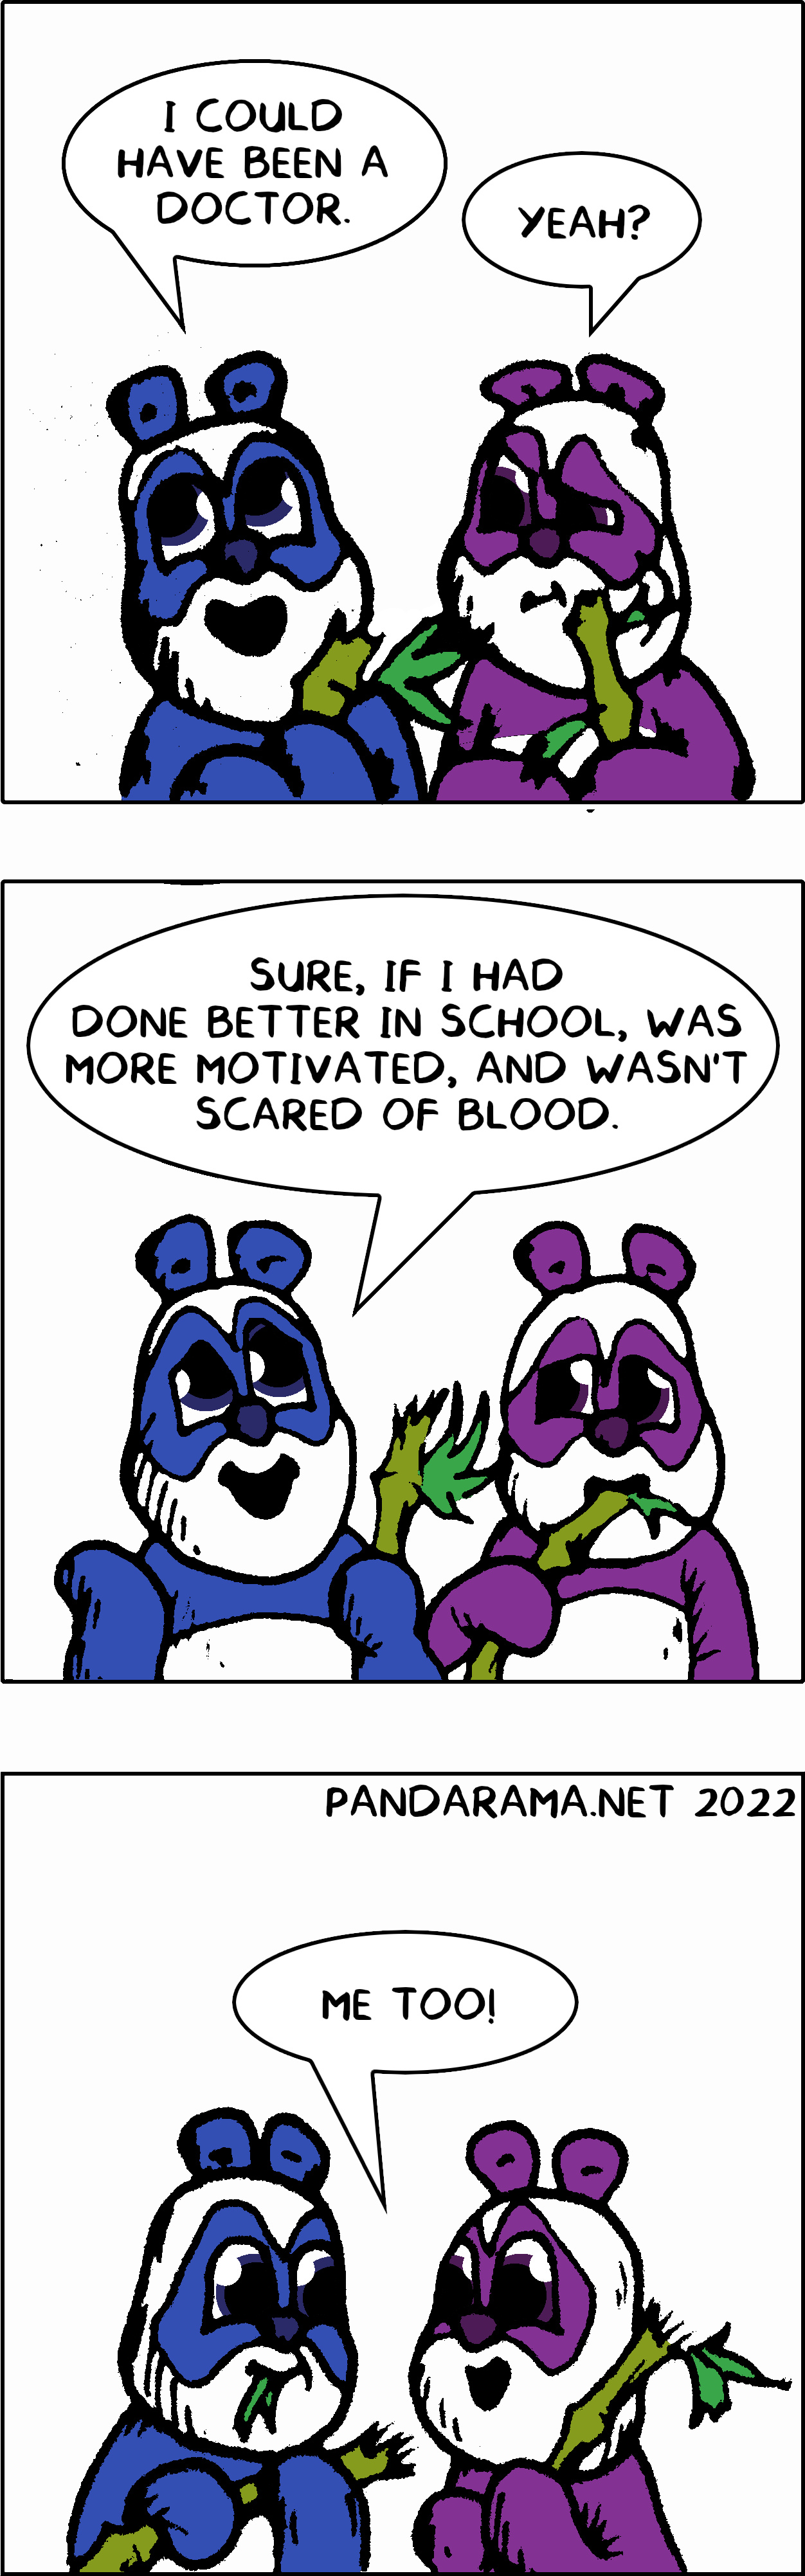 pandarama cartoon. One panda says ;i could've been a doctor if I'd worked harder and wasn't scared of blood' the other panda says 'he could have been one too'